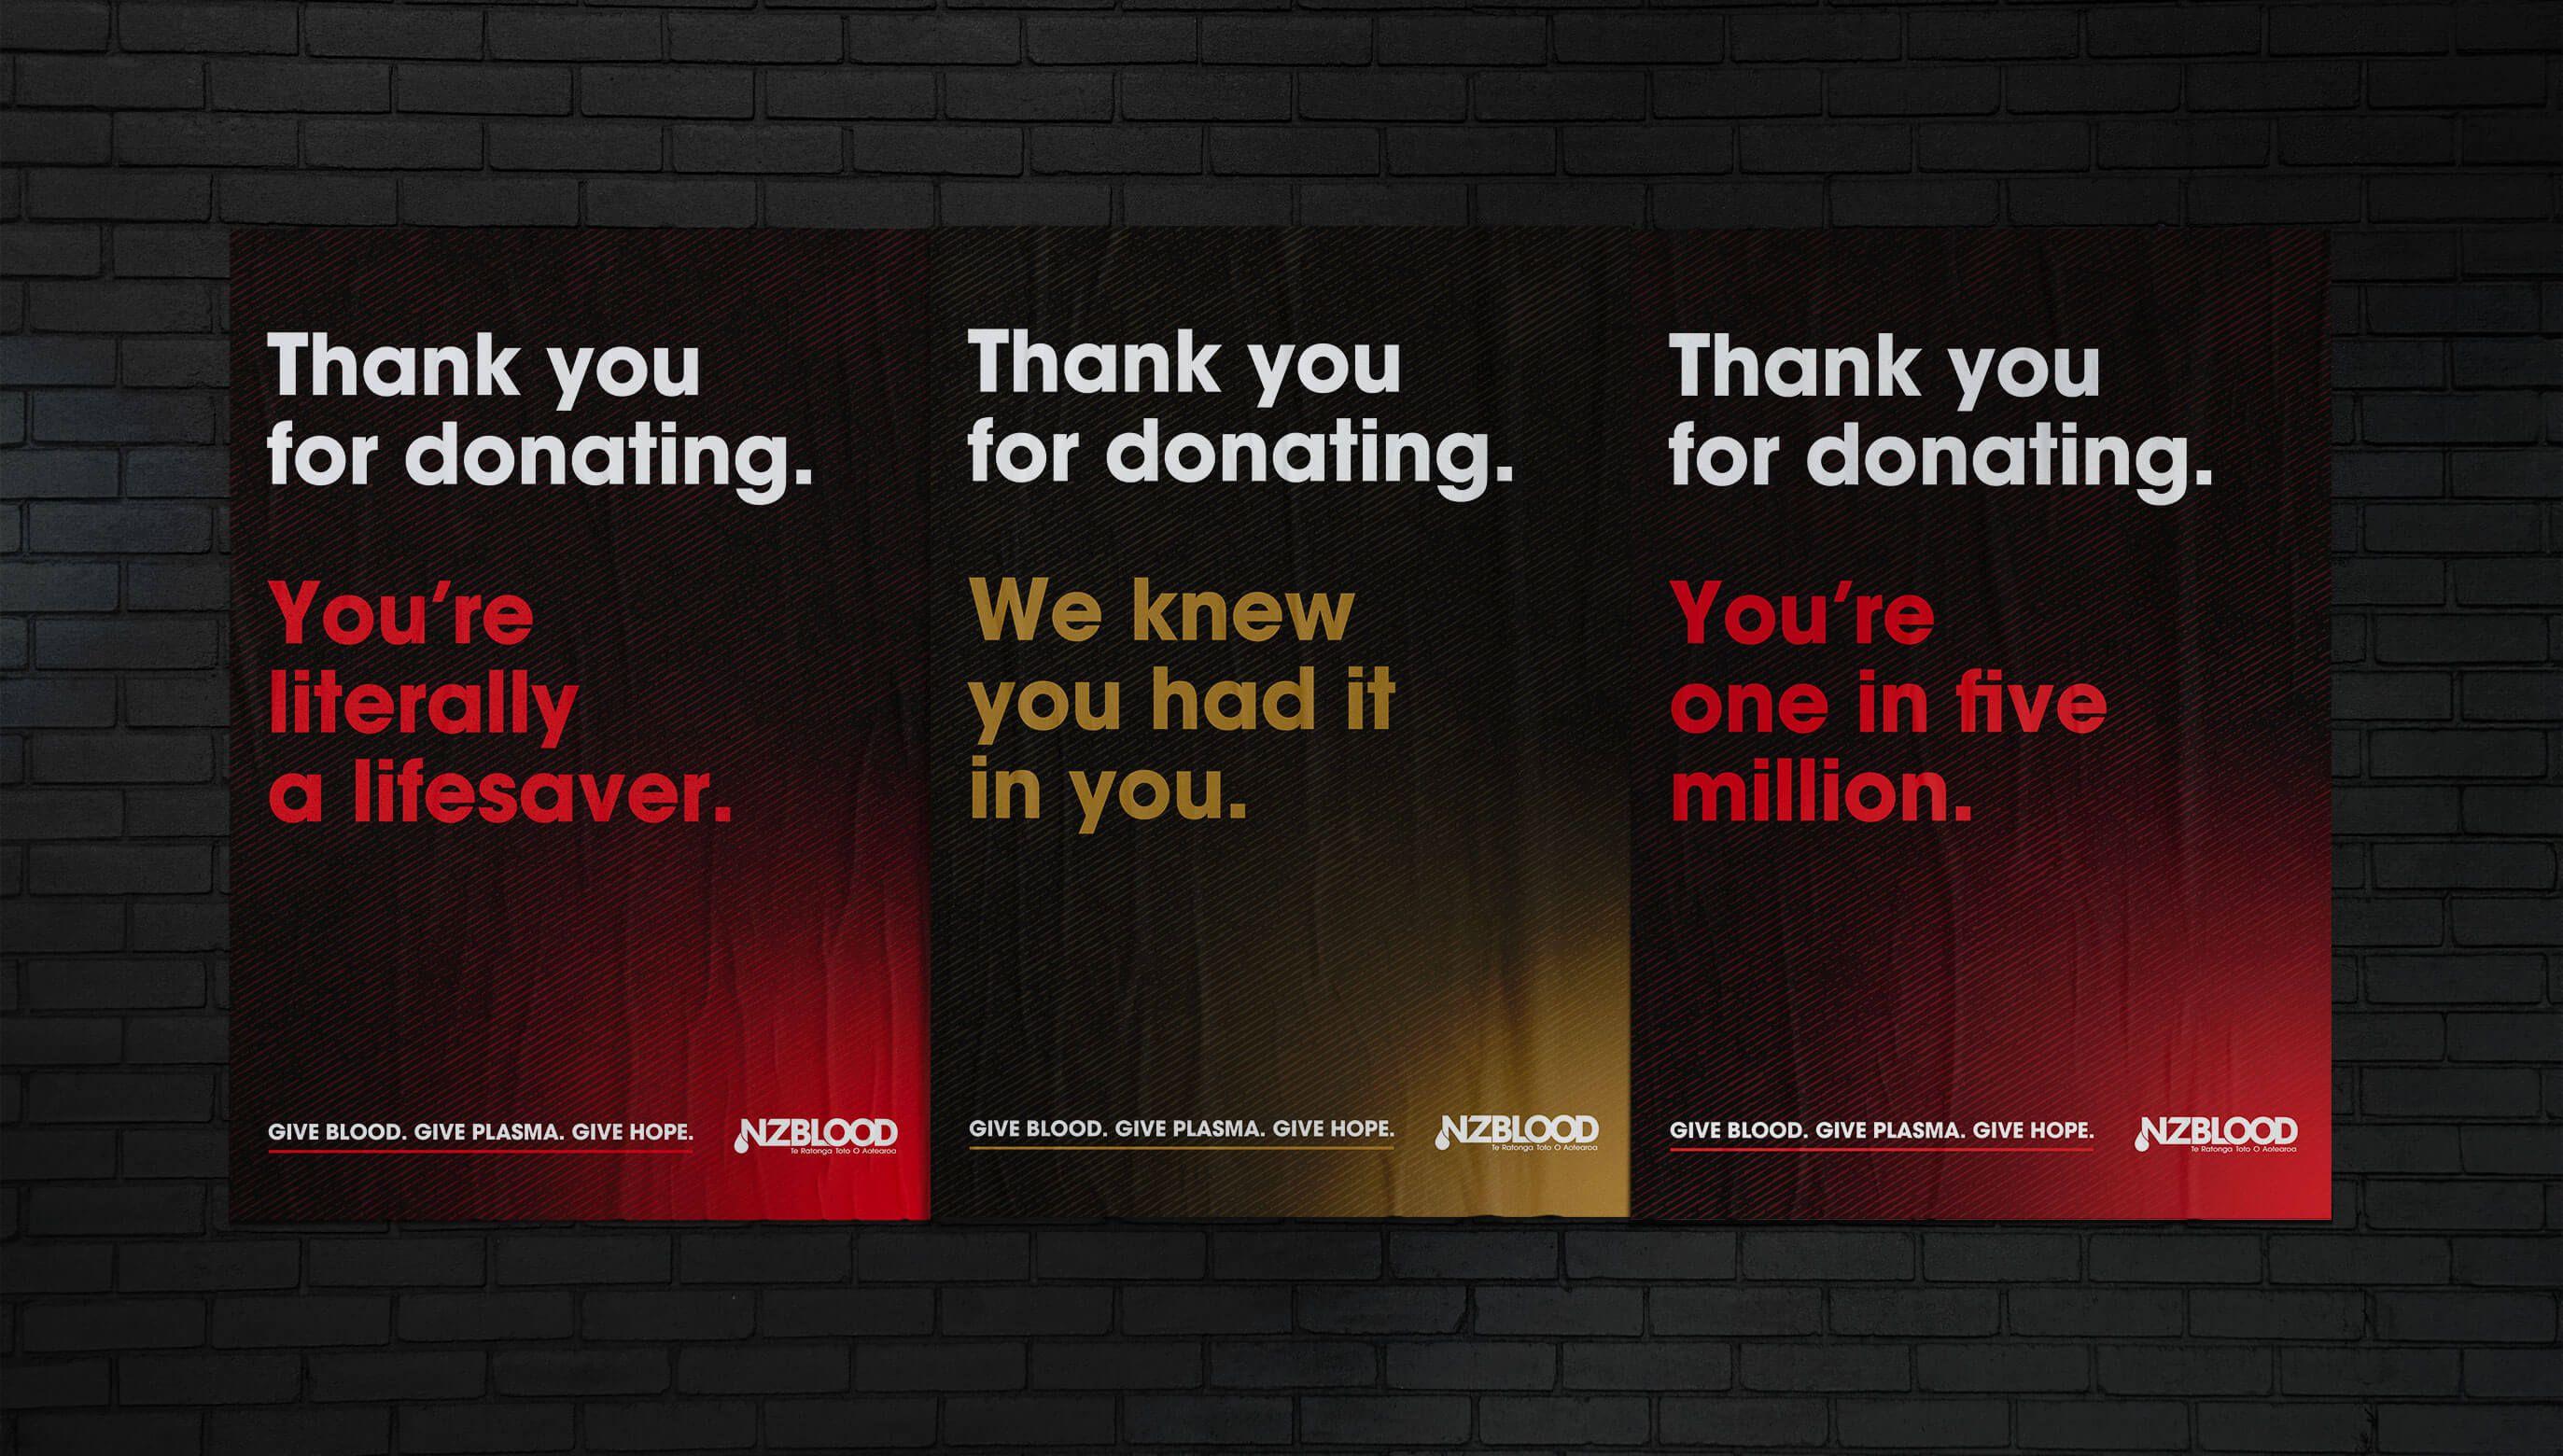 Posters we designed and produced for NZblood.